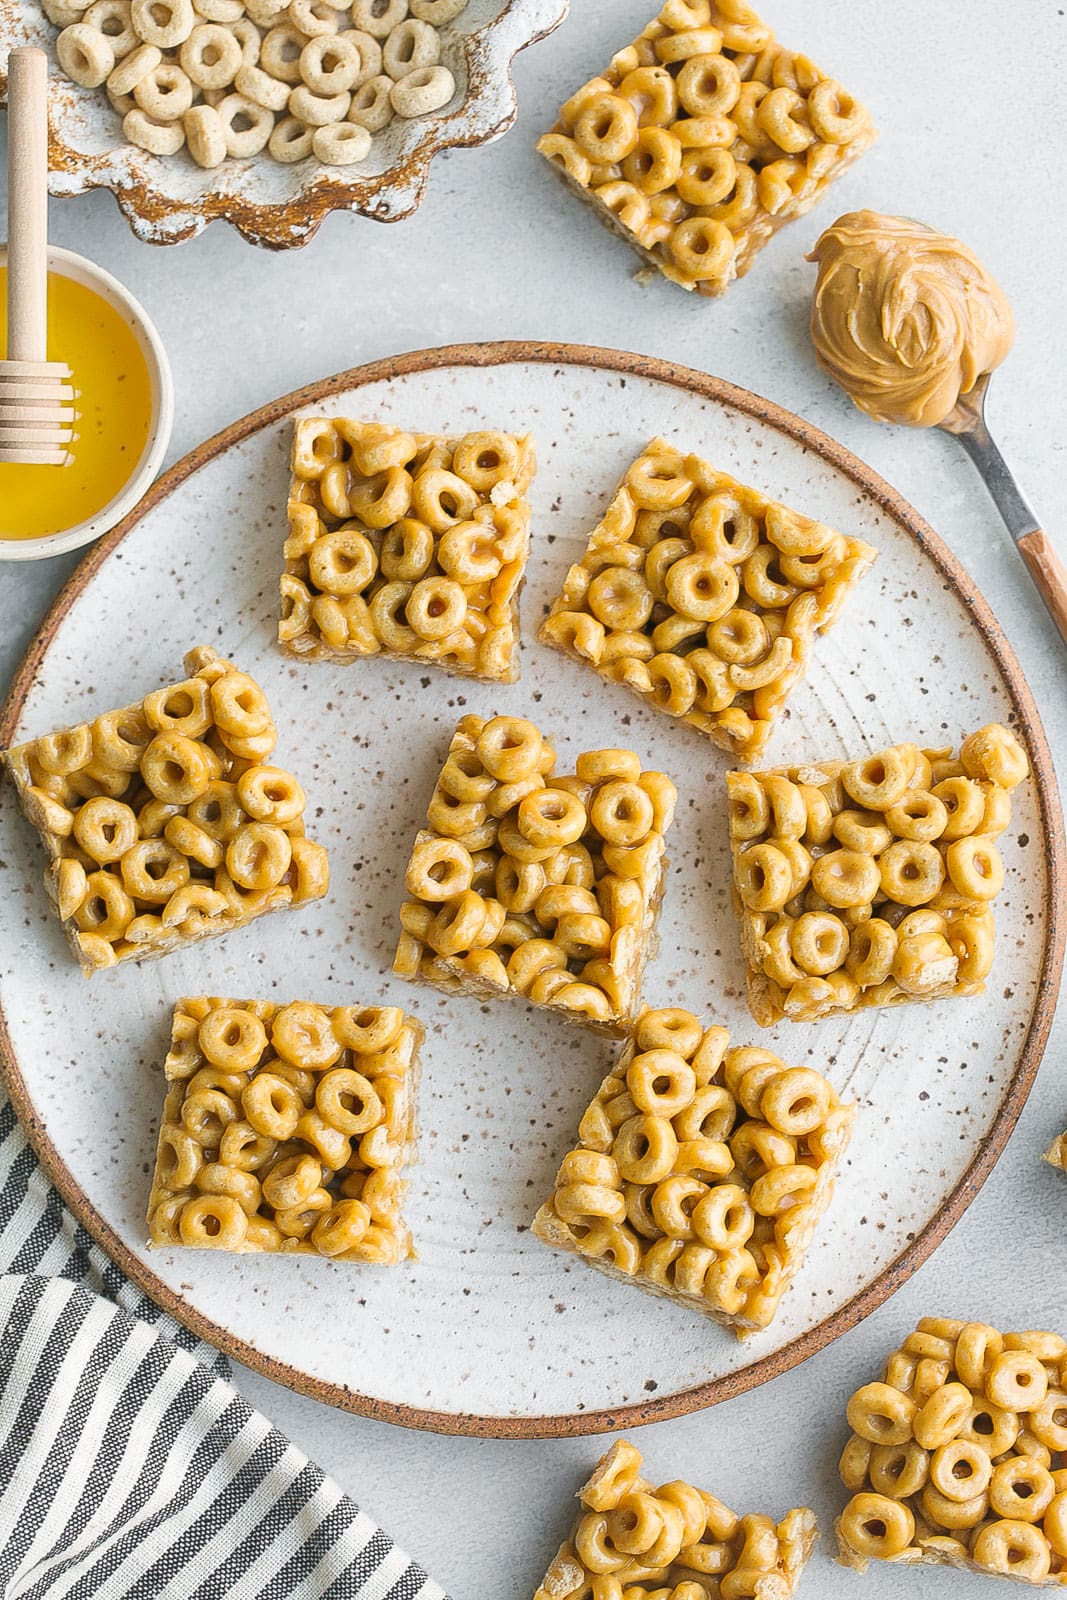 Cereal bars on plate with cheerios, honey and peanut butter.